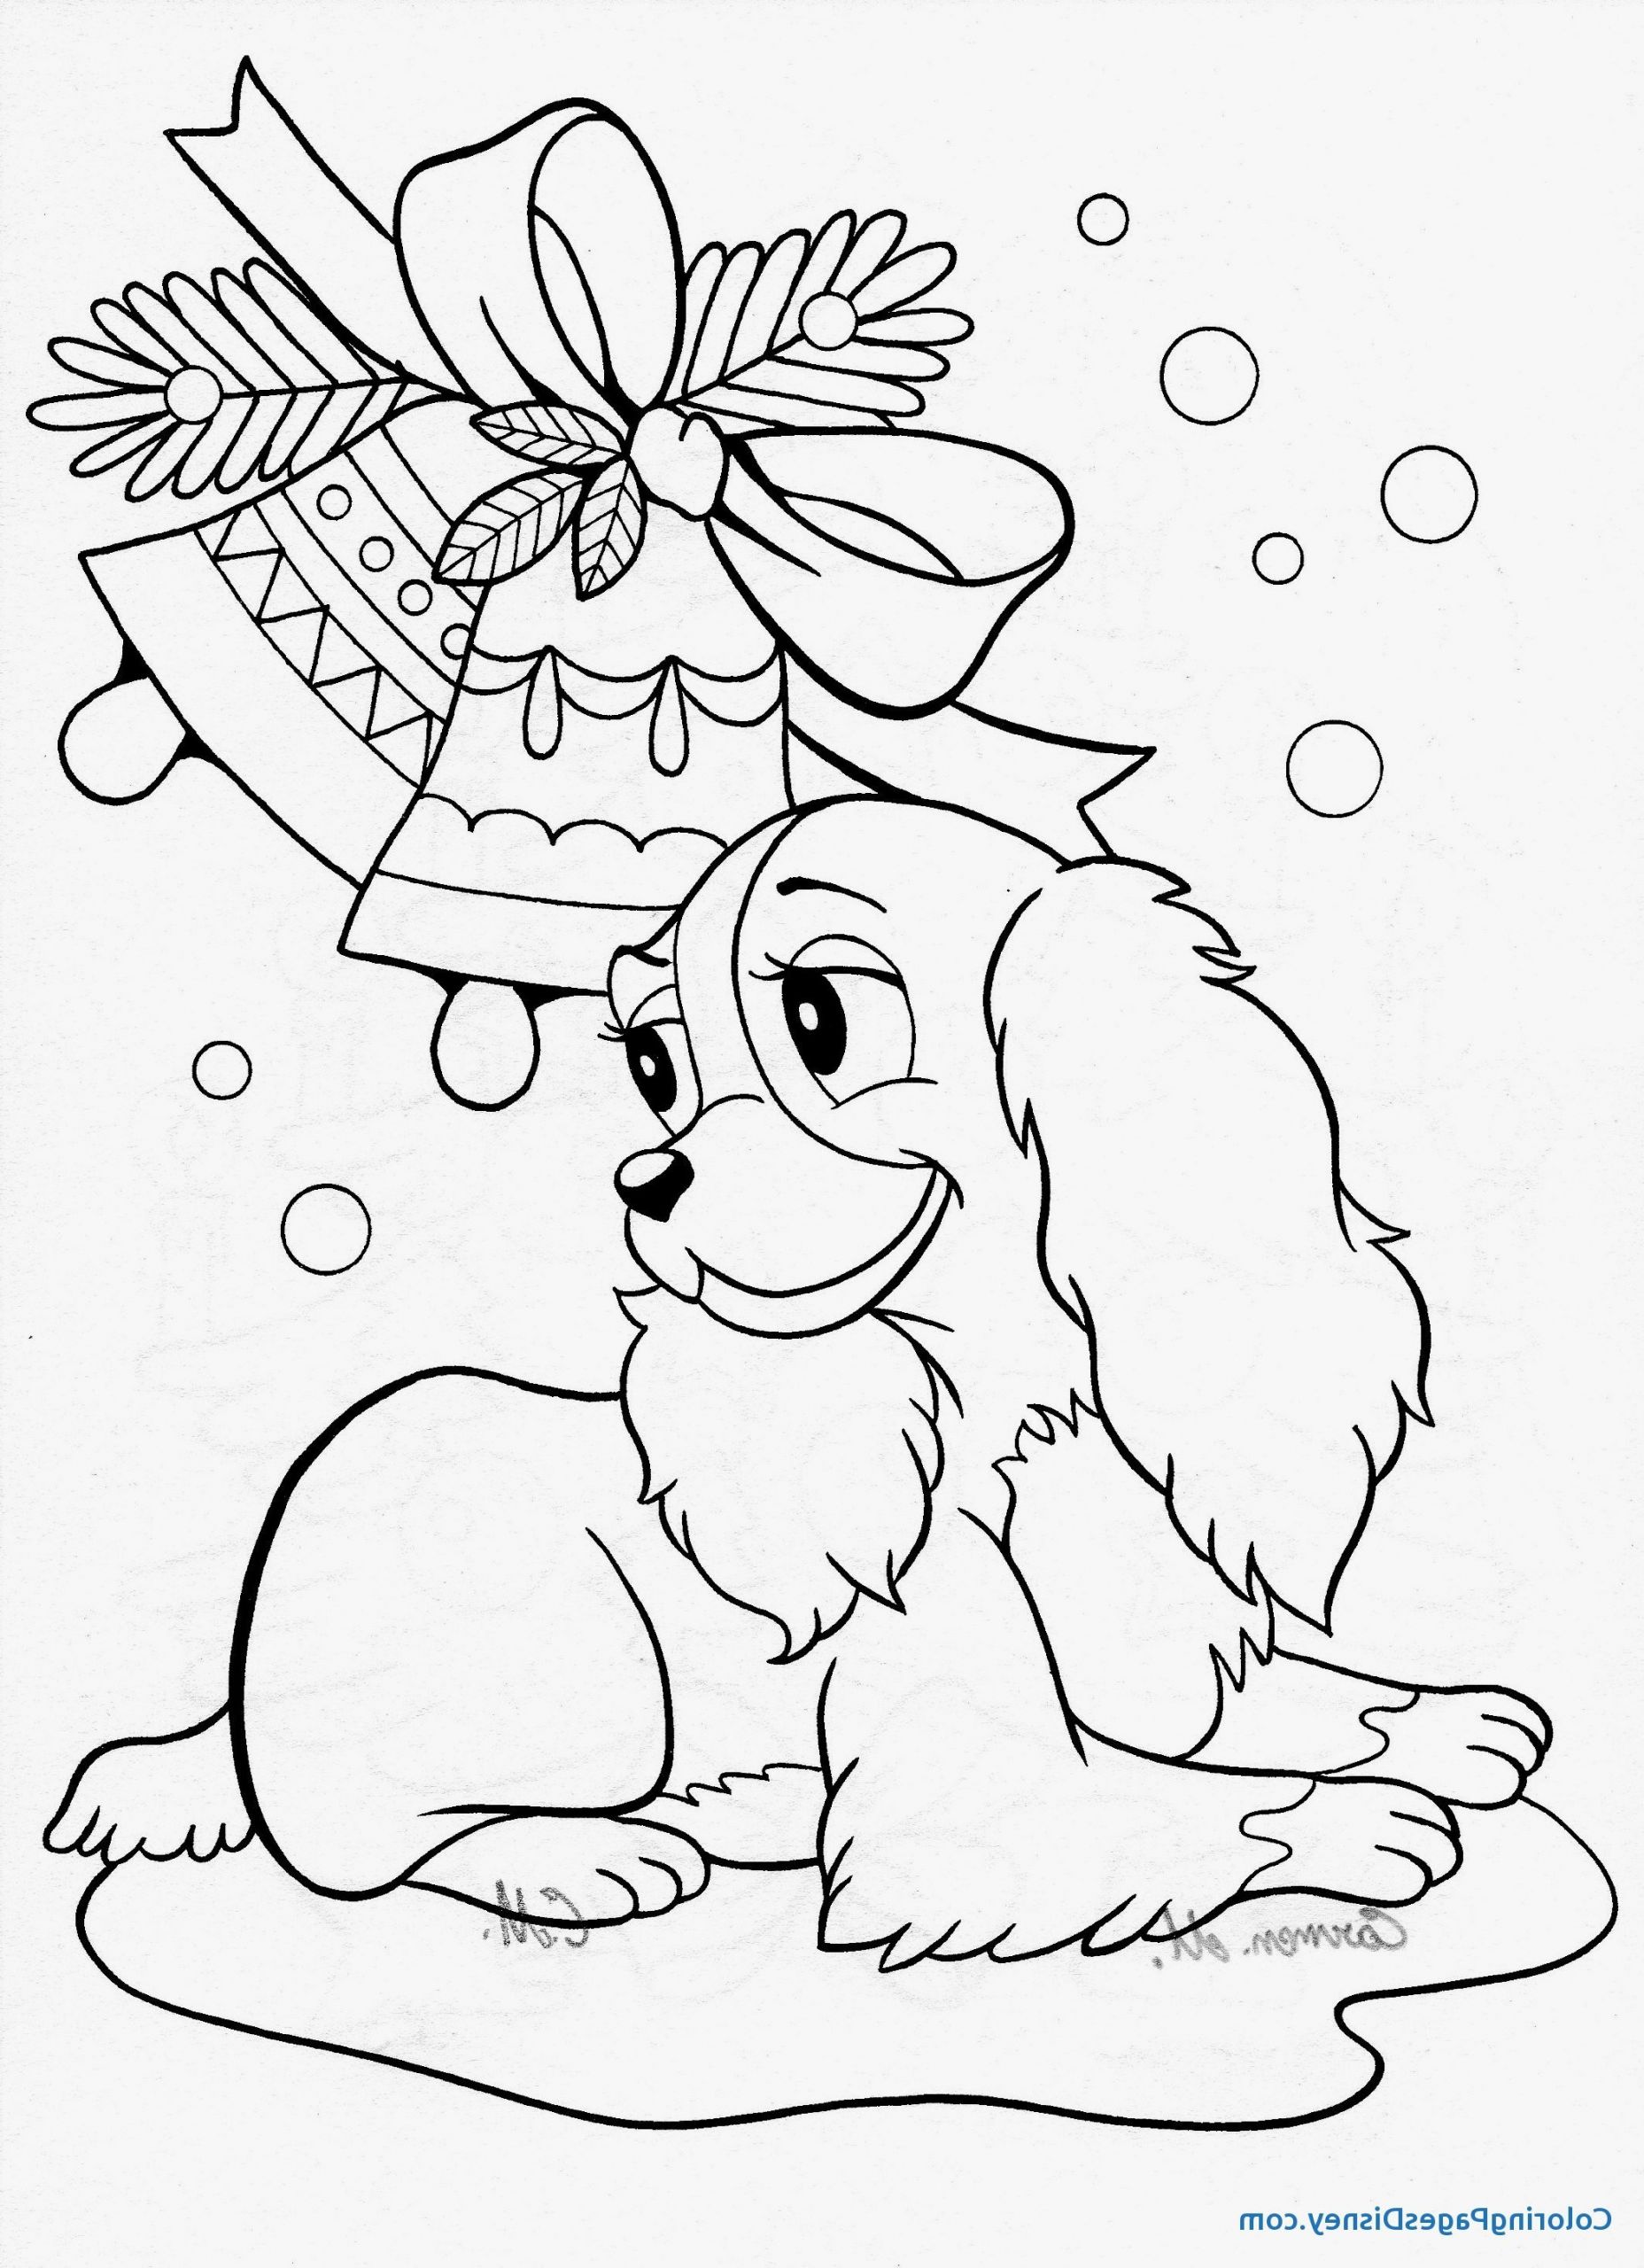 farm animals coloring picture new photos beautiful fun animal coloring pages tintuc247 of farm animals coloring picture